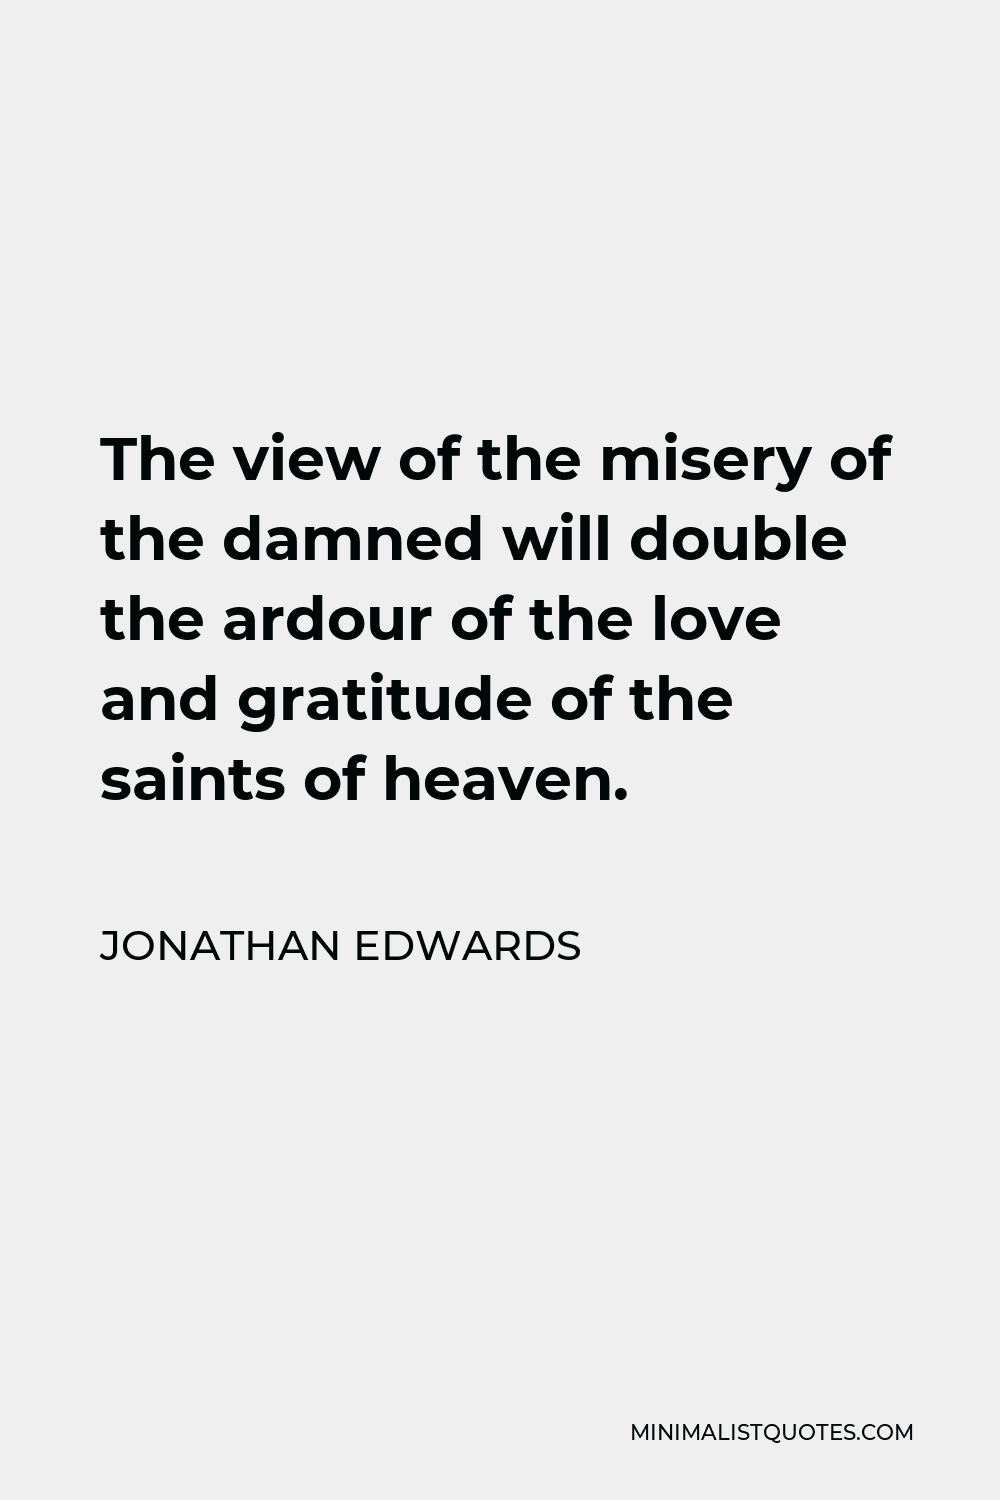 Jonathan Edwards Quote - The view of the misery of the damned will double the ardour of the love and gratitude of the saints of heaven.